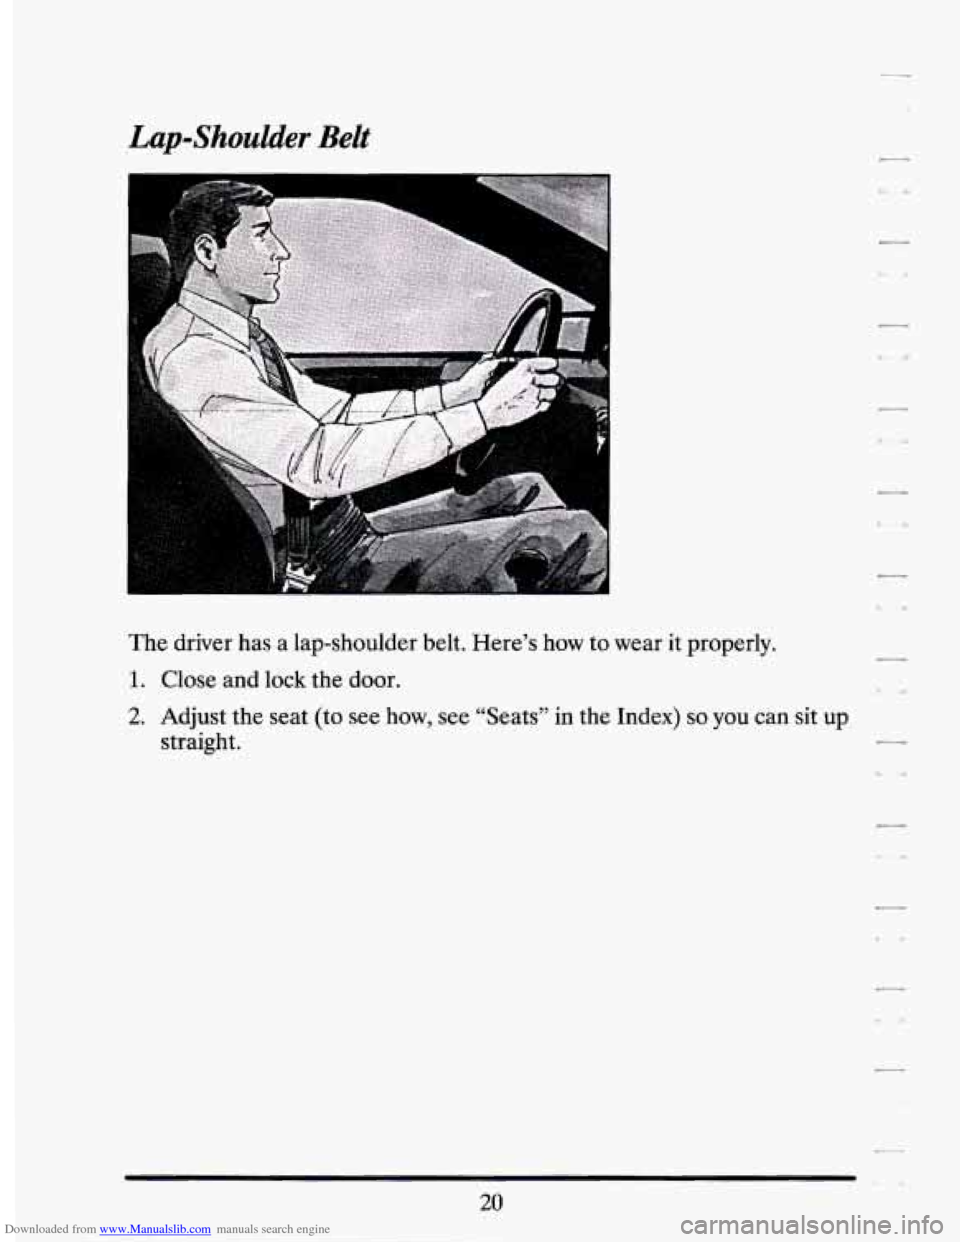 CADILLAC SEVILLE 1994 4.G Owners Guide Downloaded from www.Manualslib.com manuals search engine Lawshoulder Belt 
I 
The driver  has  a lap-shoulder  belt.  Here’s  how  to wear  it properly. 
1. Close  and  lock  the door. 
2. Adjust th